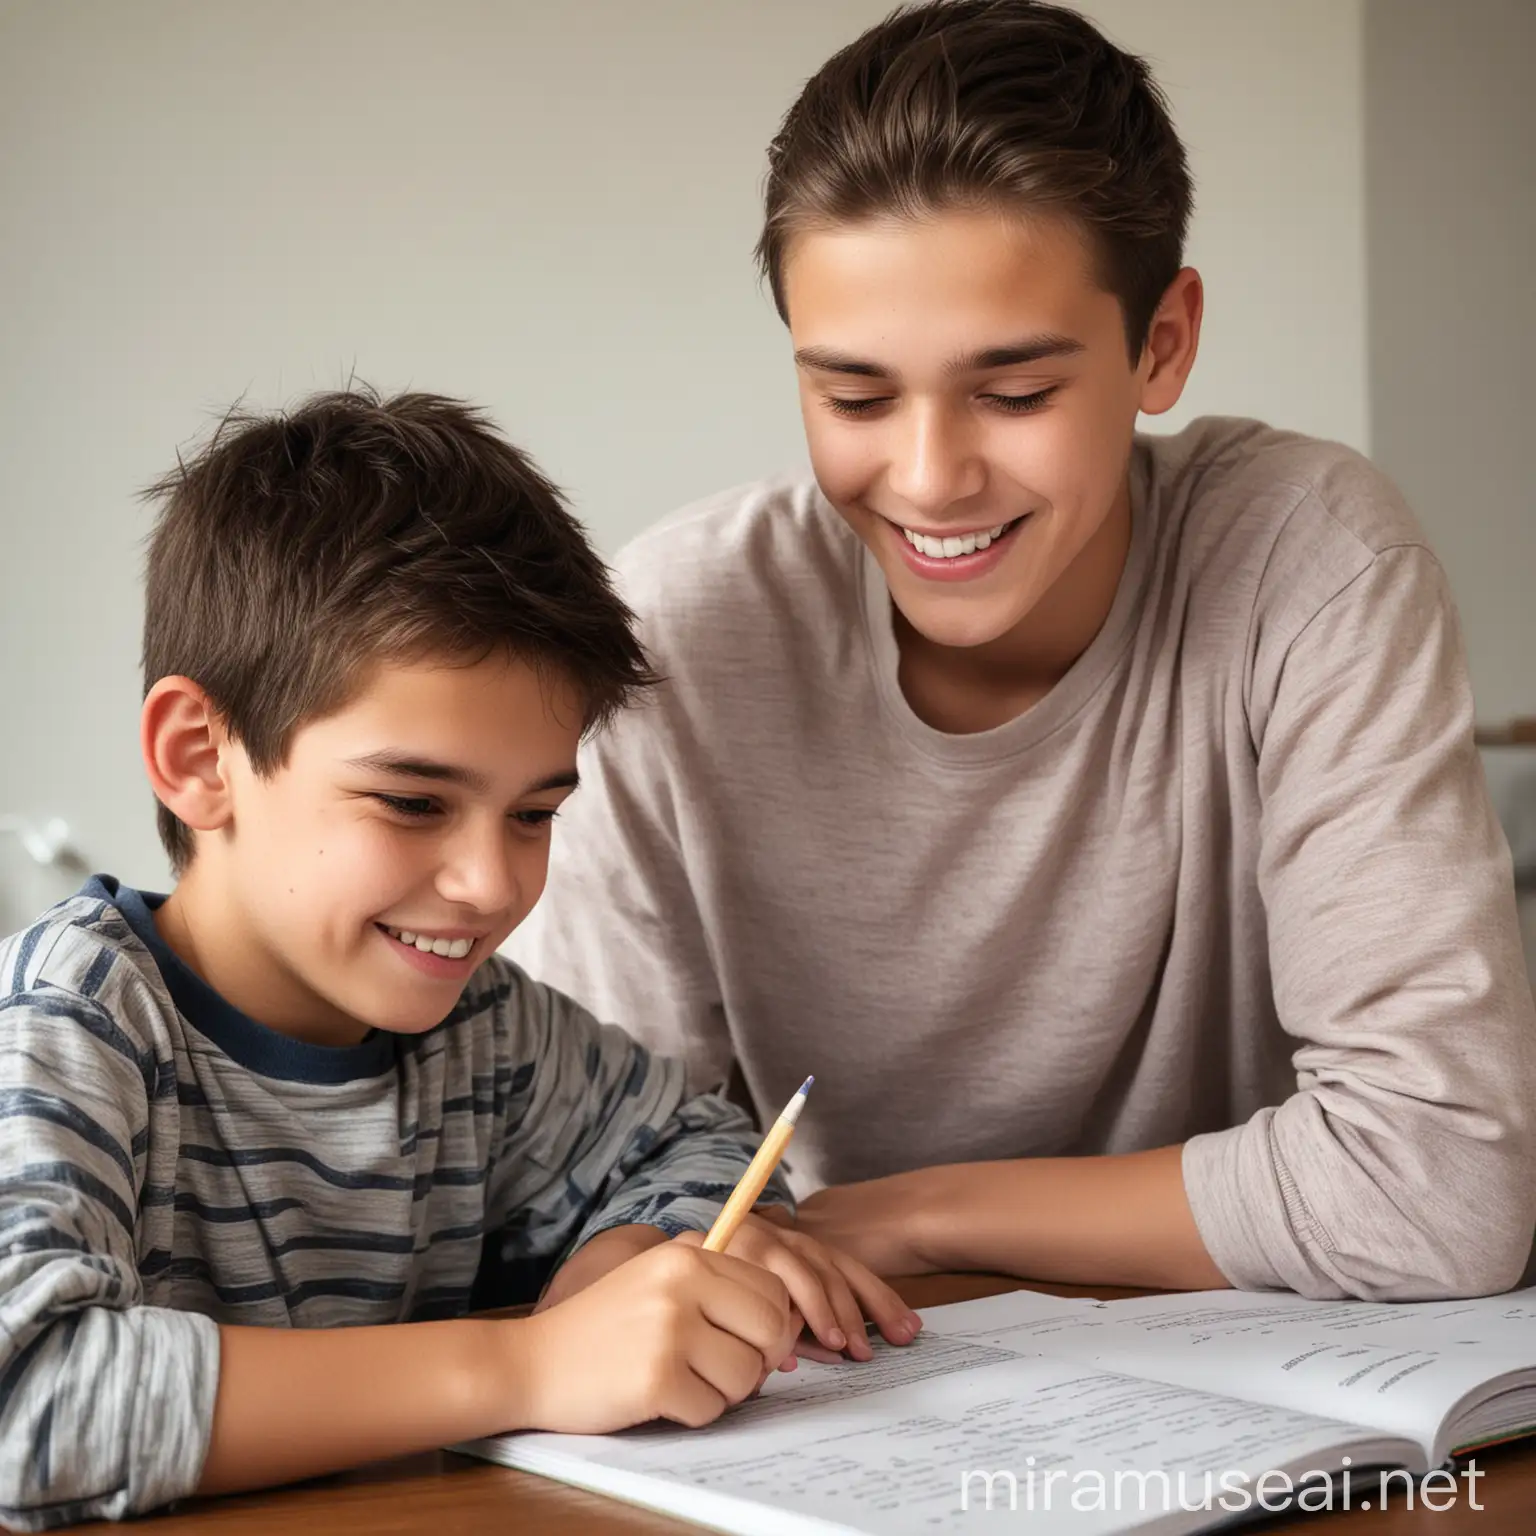 A small child sitting near a teenager and helping him to do his homework, the age of the teenager is 16 years old, they are smiling

